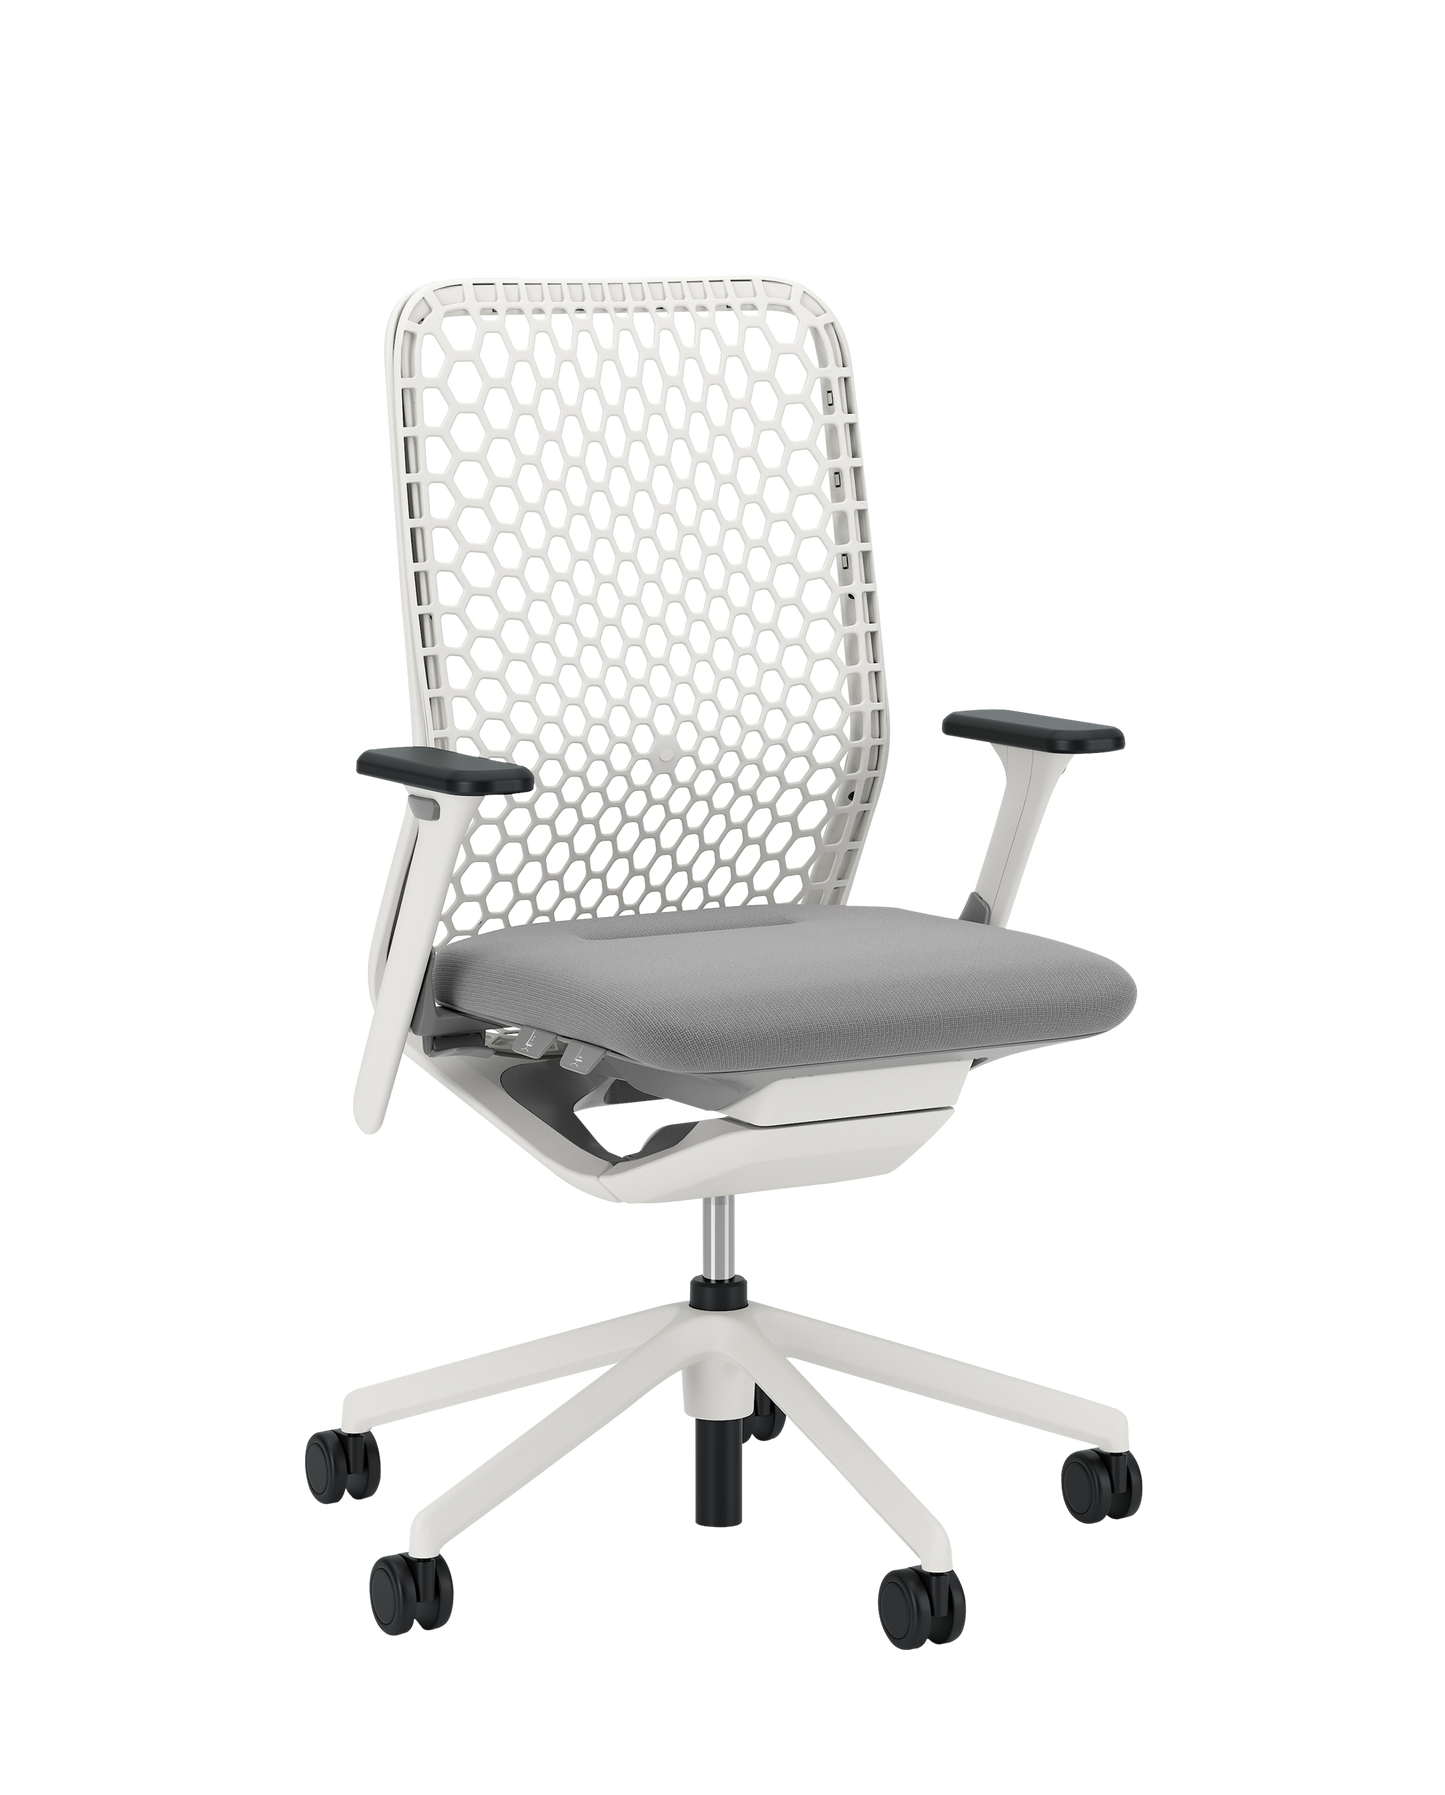 YouTEAM Office Chair